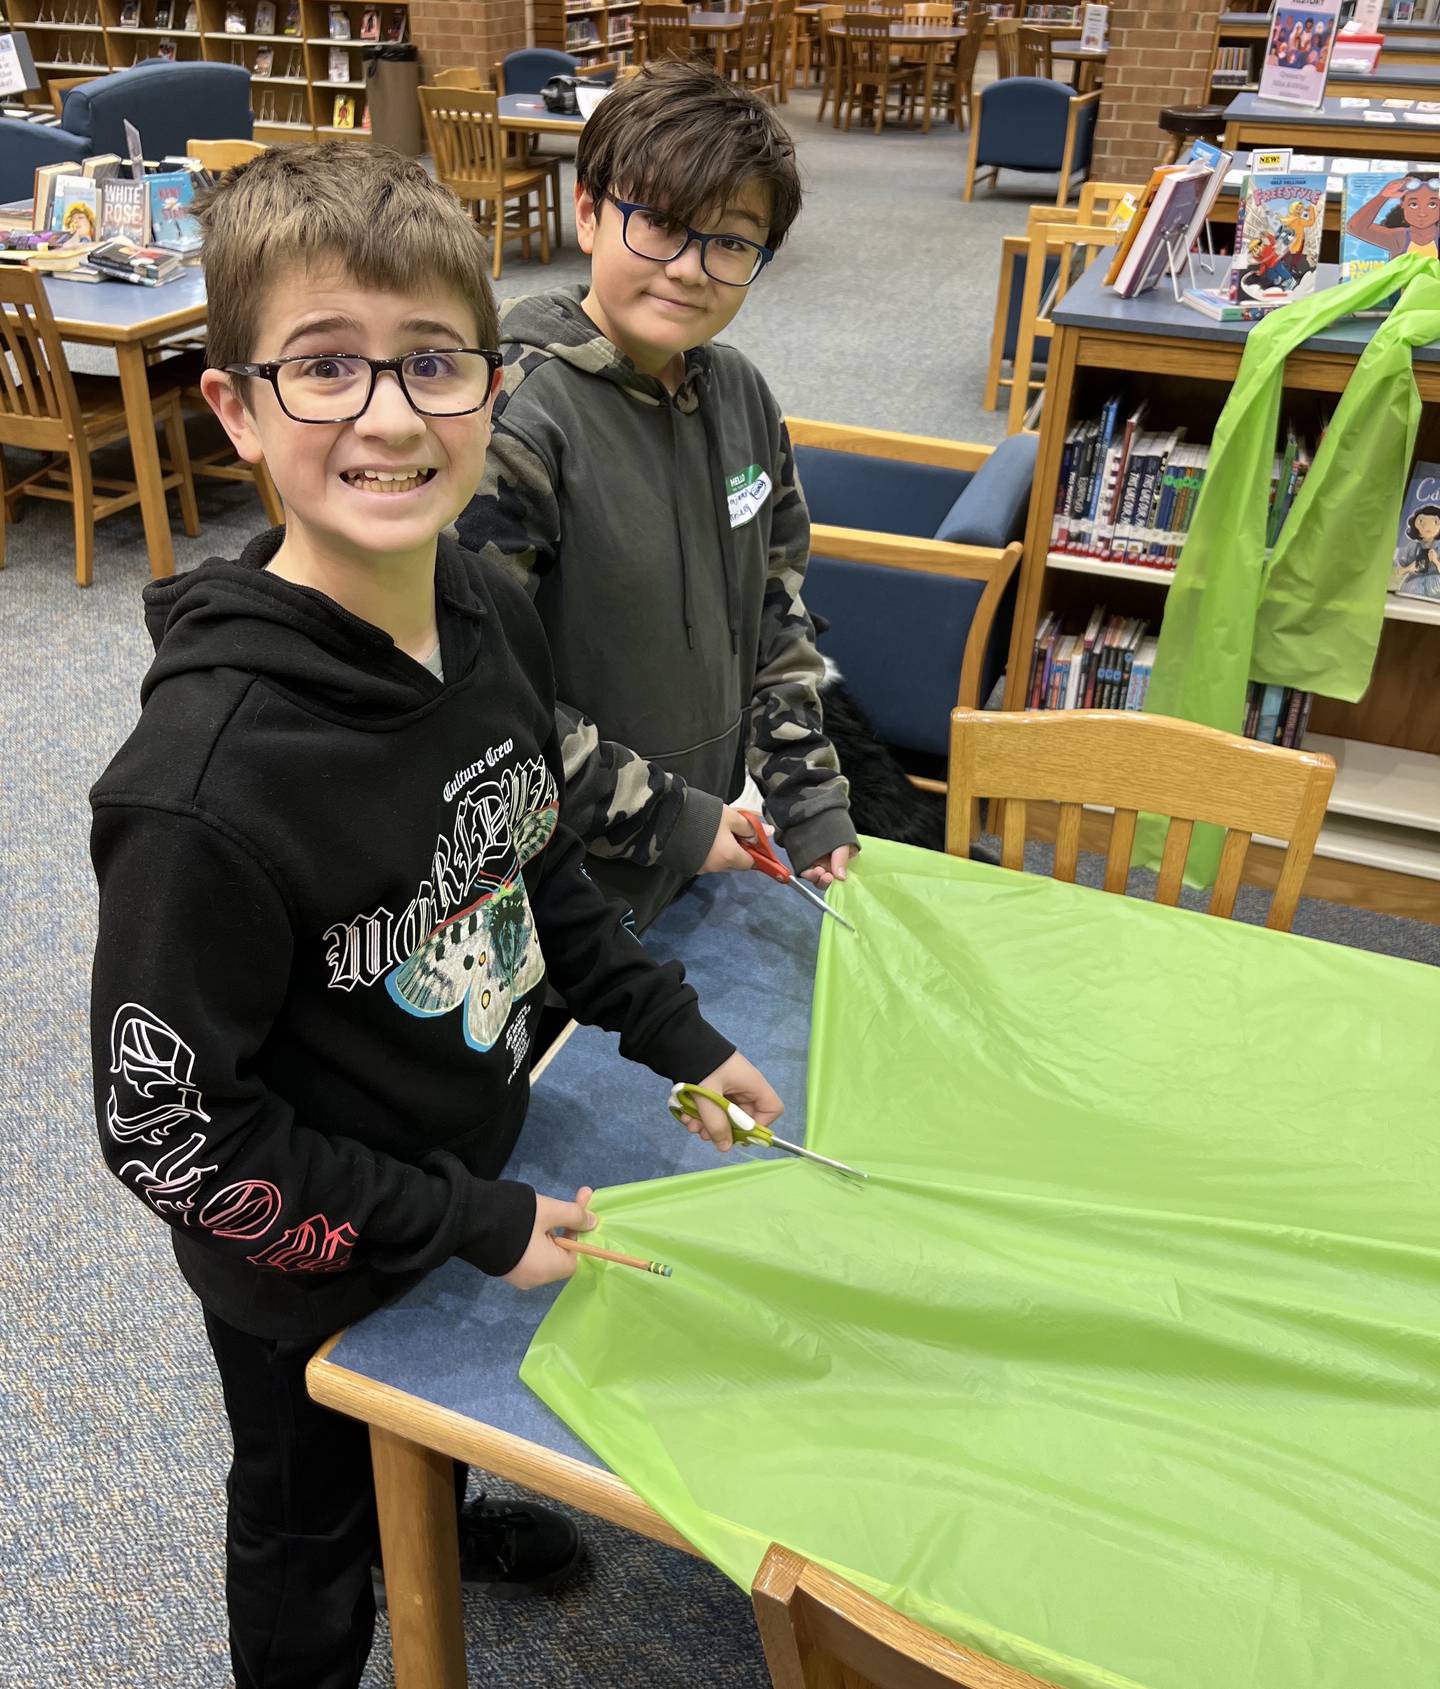 Andrew Kournetas (left) and Ben Krieg cut bright green plastic sheets into strips so they can be tied as ribbons in Geneva to promote May as Mental Health Awareness Month.